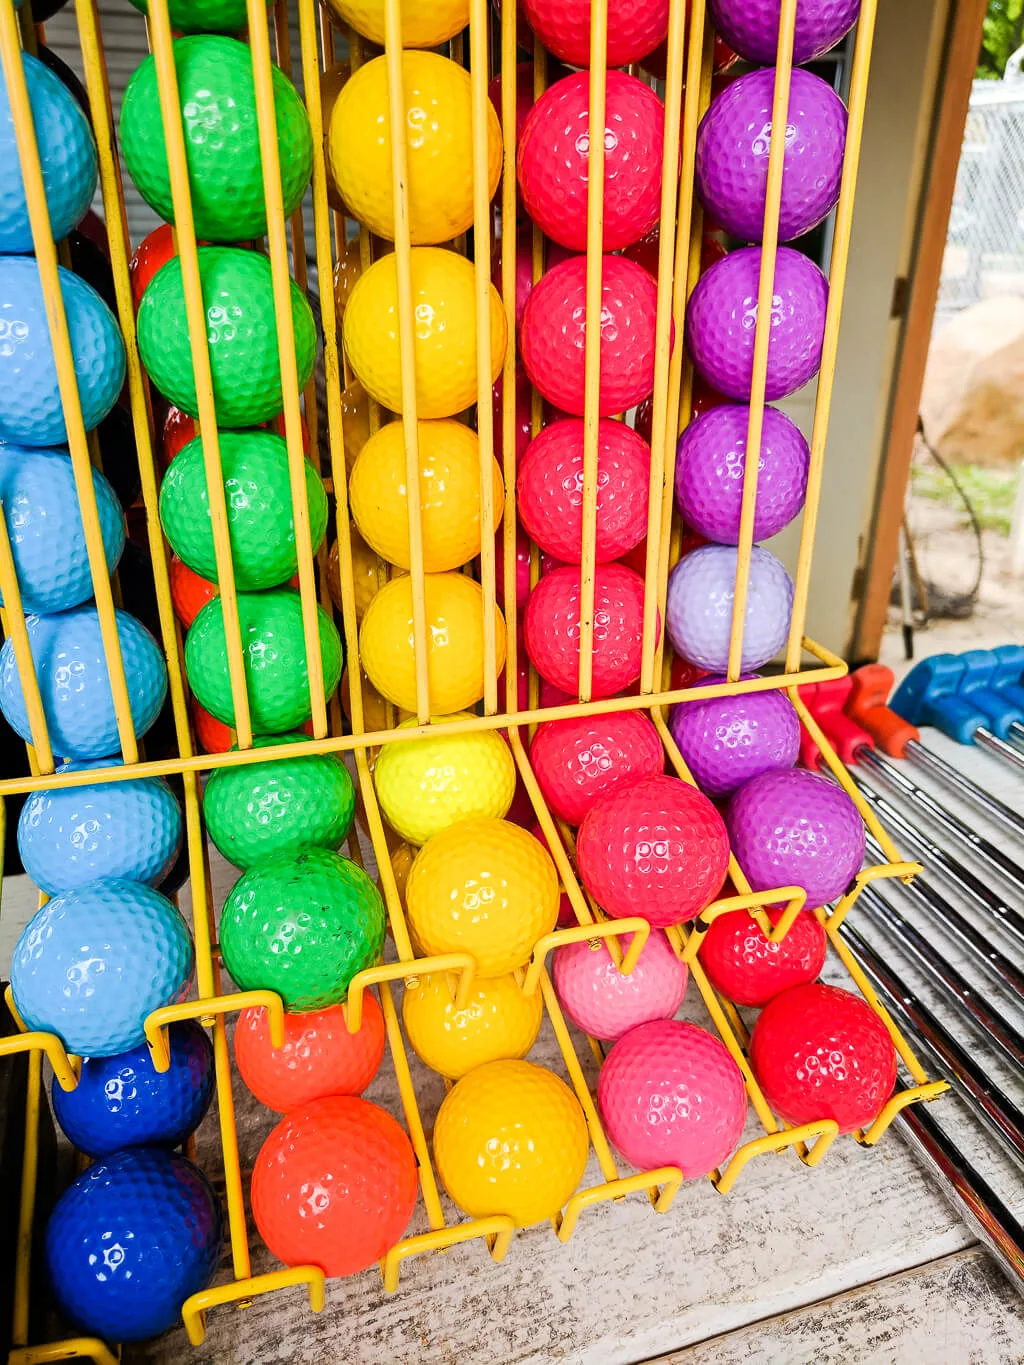 Colorful miniature golf balls in a rainbow of colors